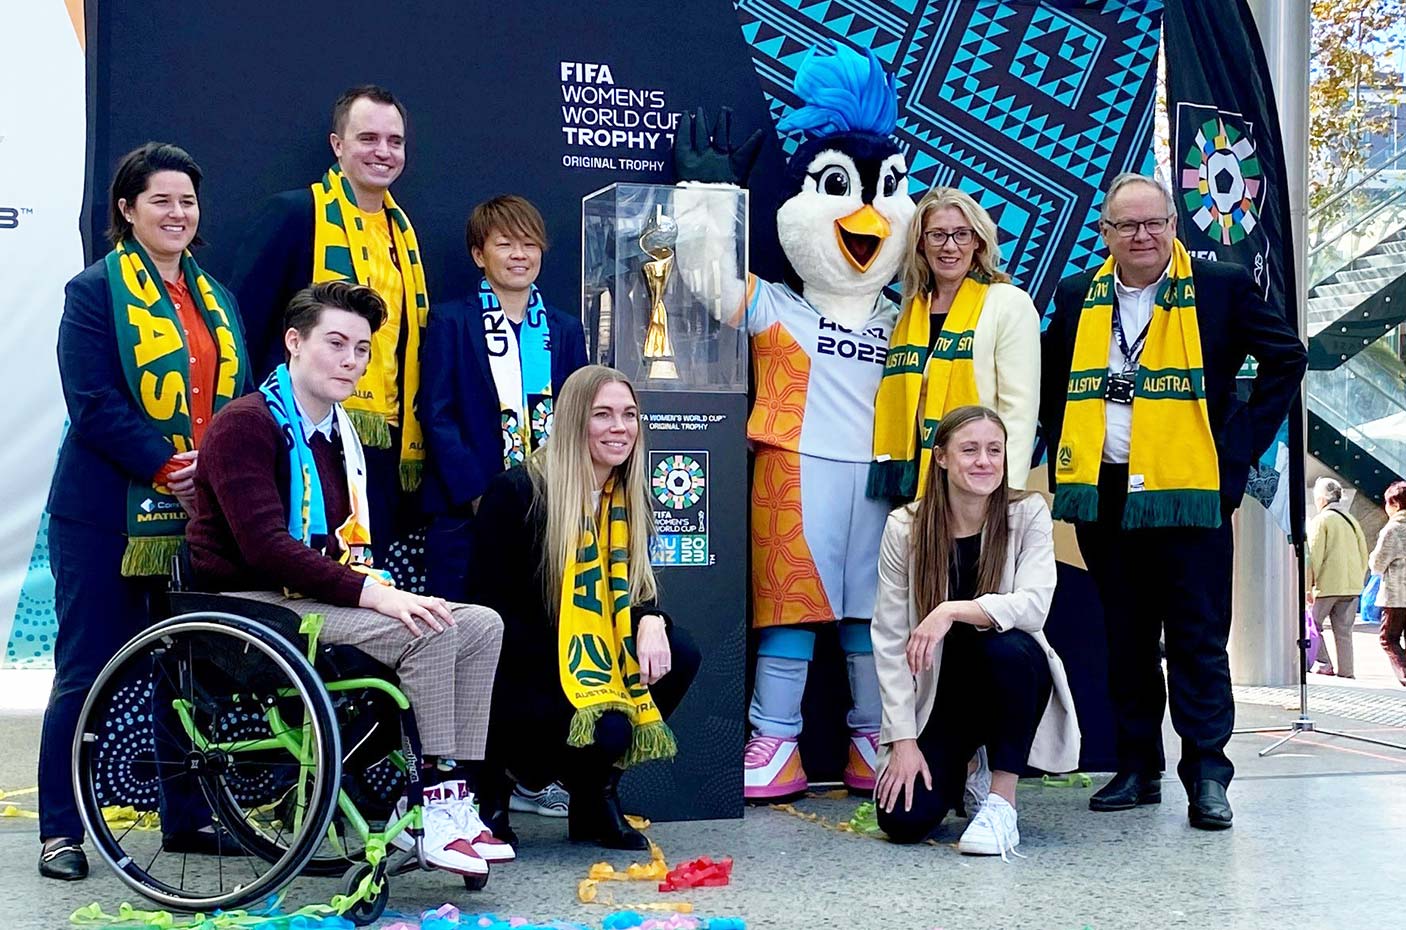 A group of people standing on a stage with Matildas scarves and a mascot